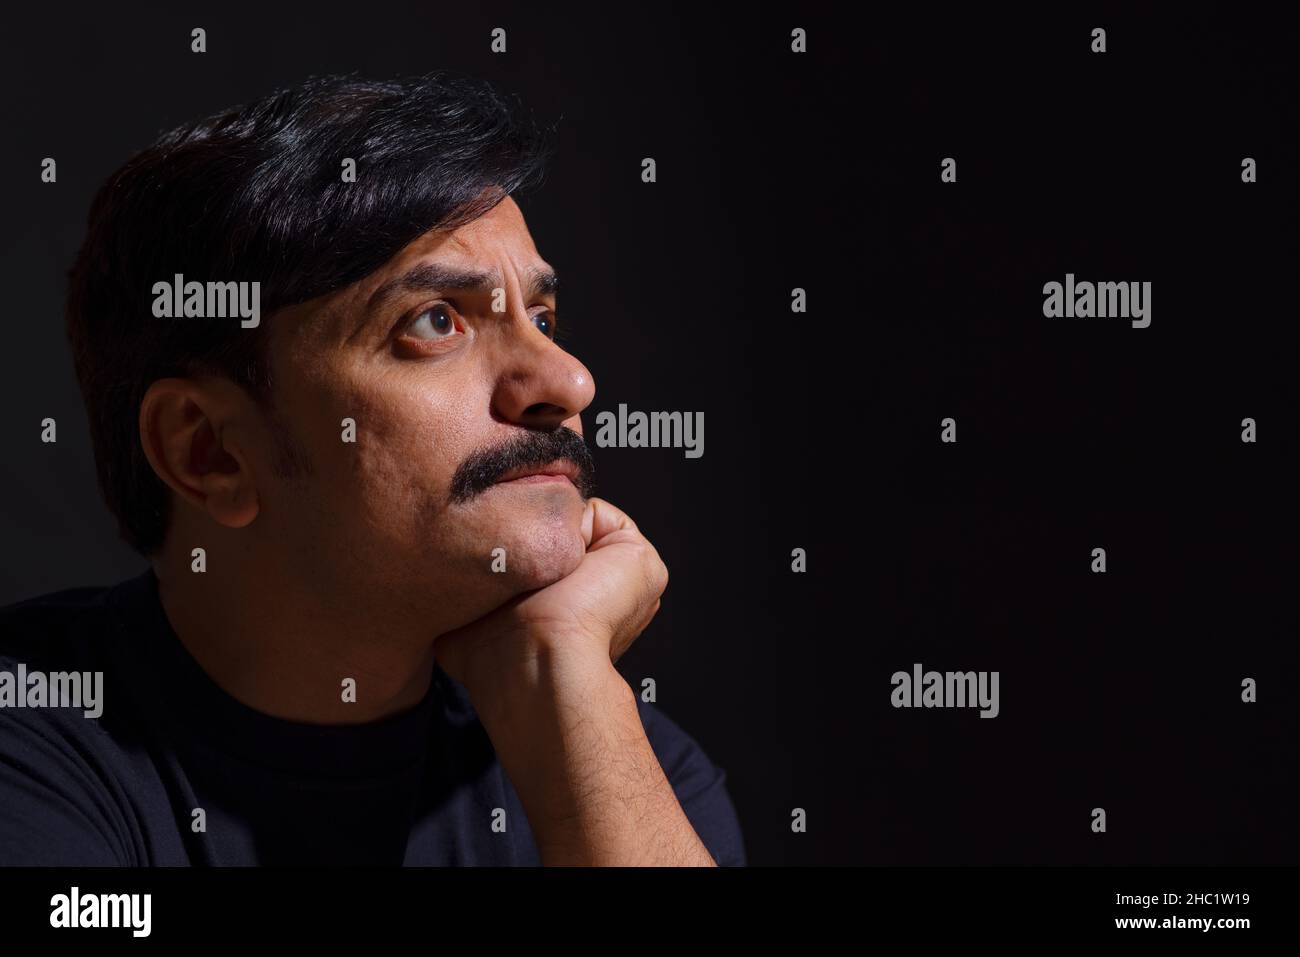 Side view of a common man with his hand on chin with black background Stock Photo